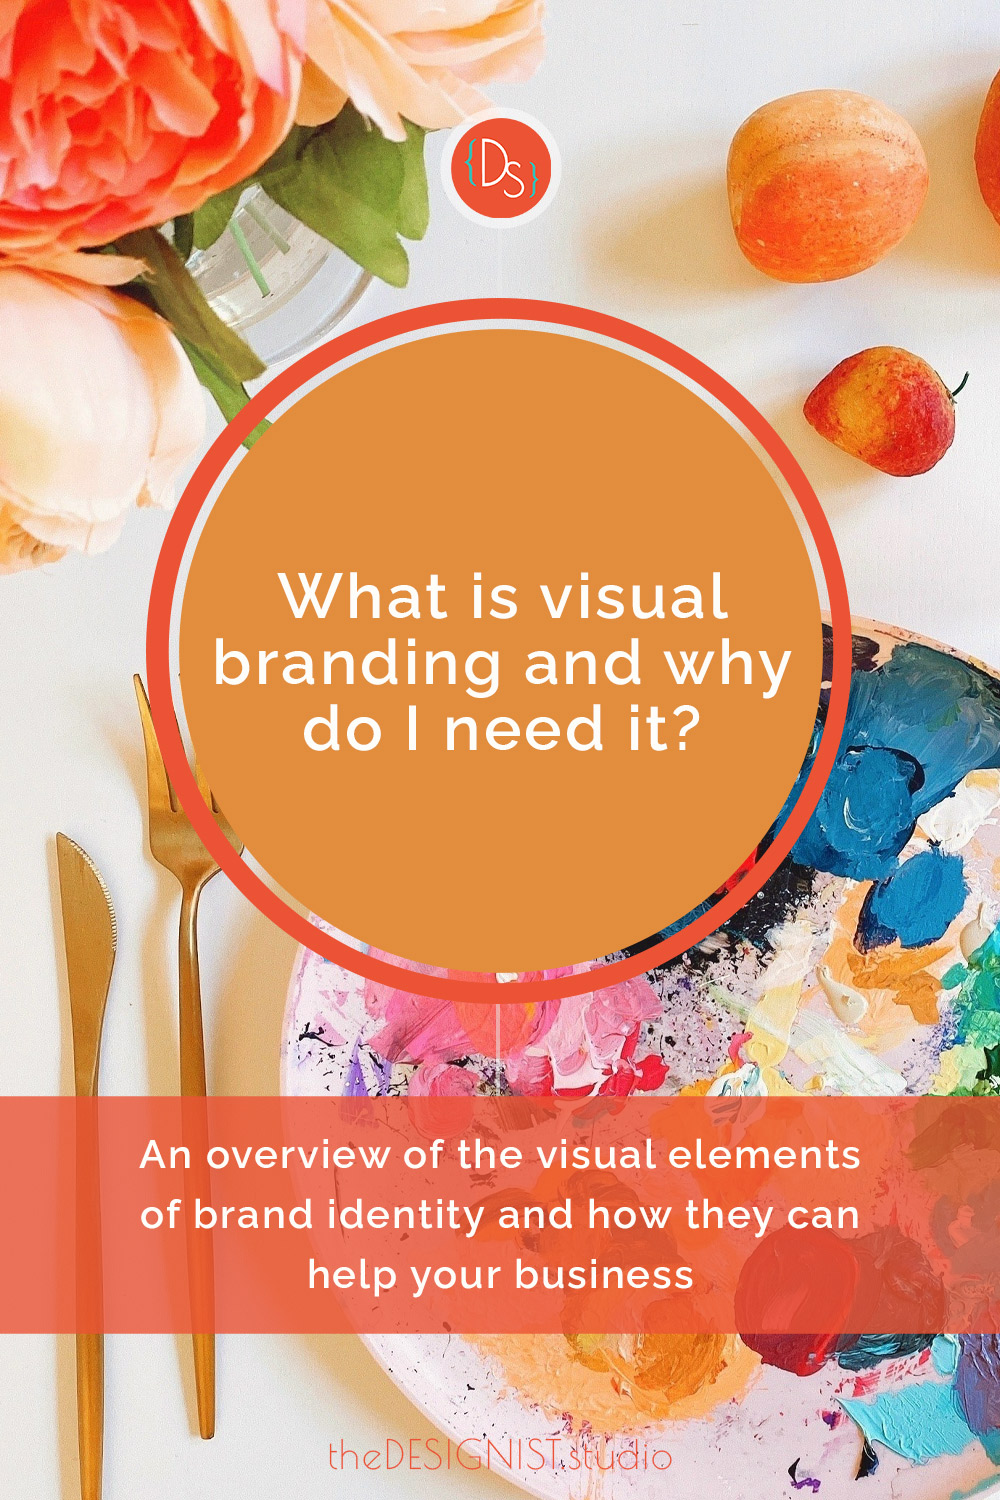 What is visual branding and why do I need it?